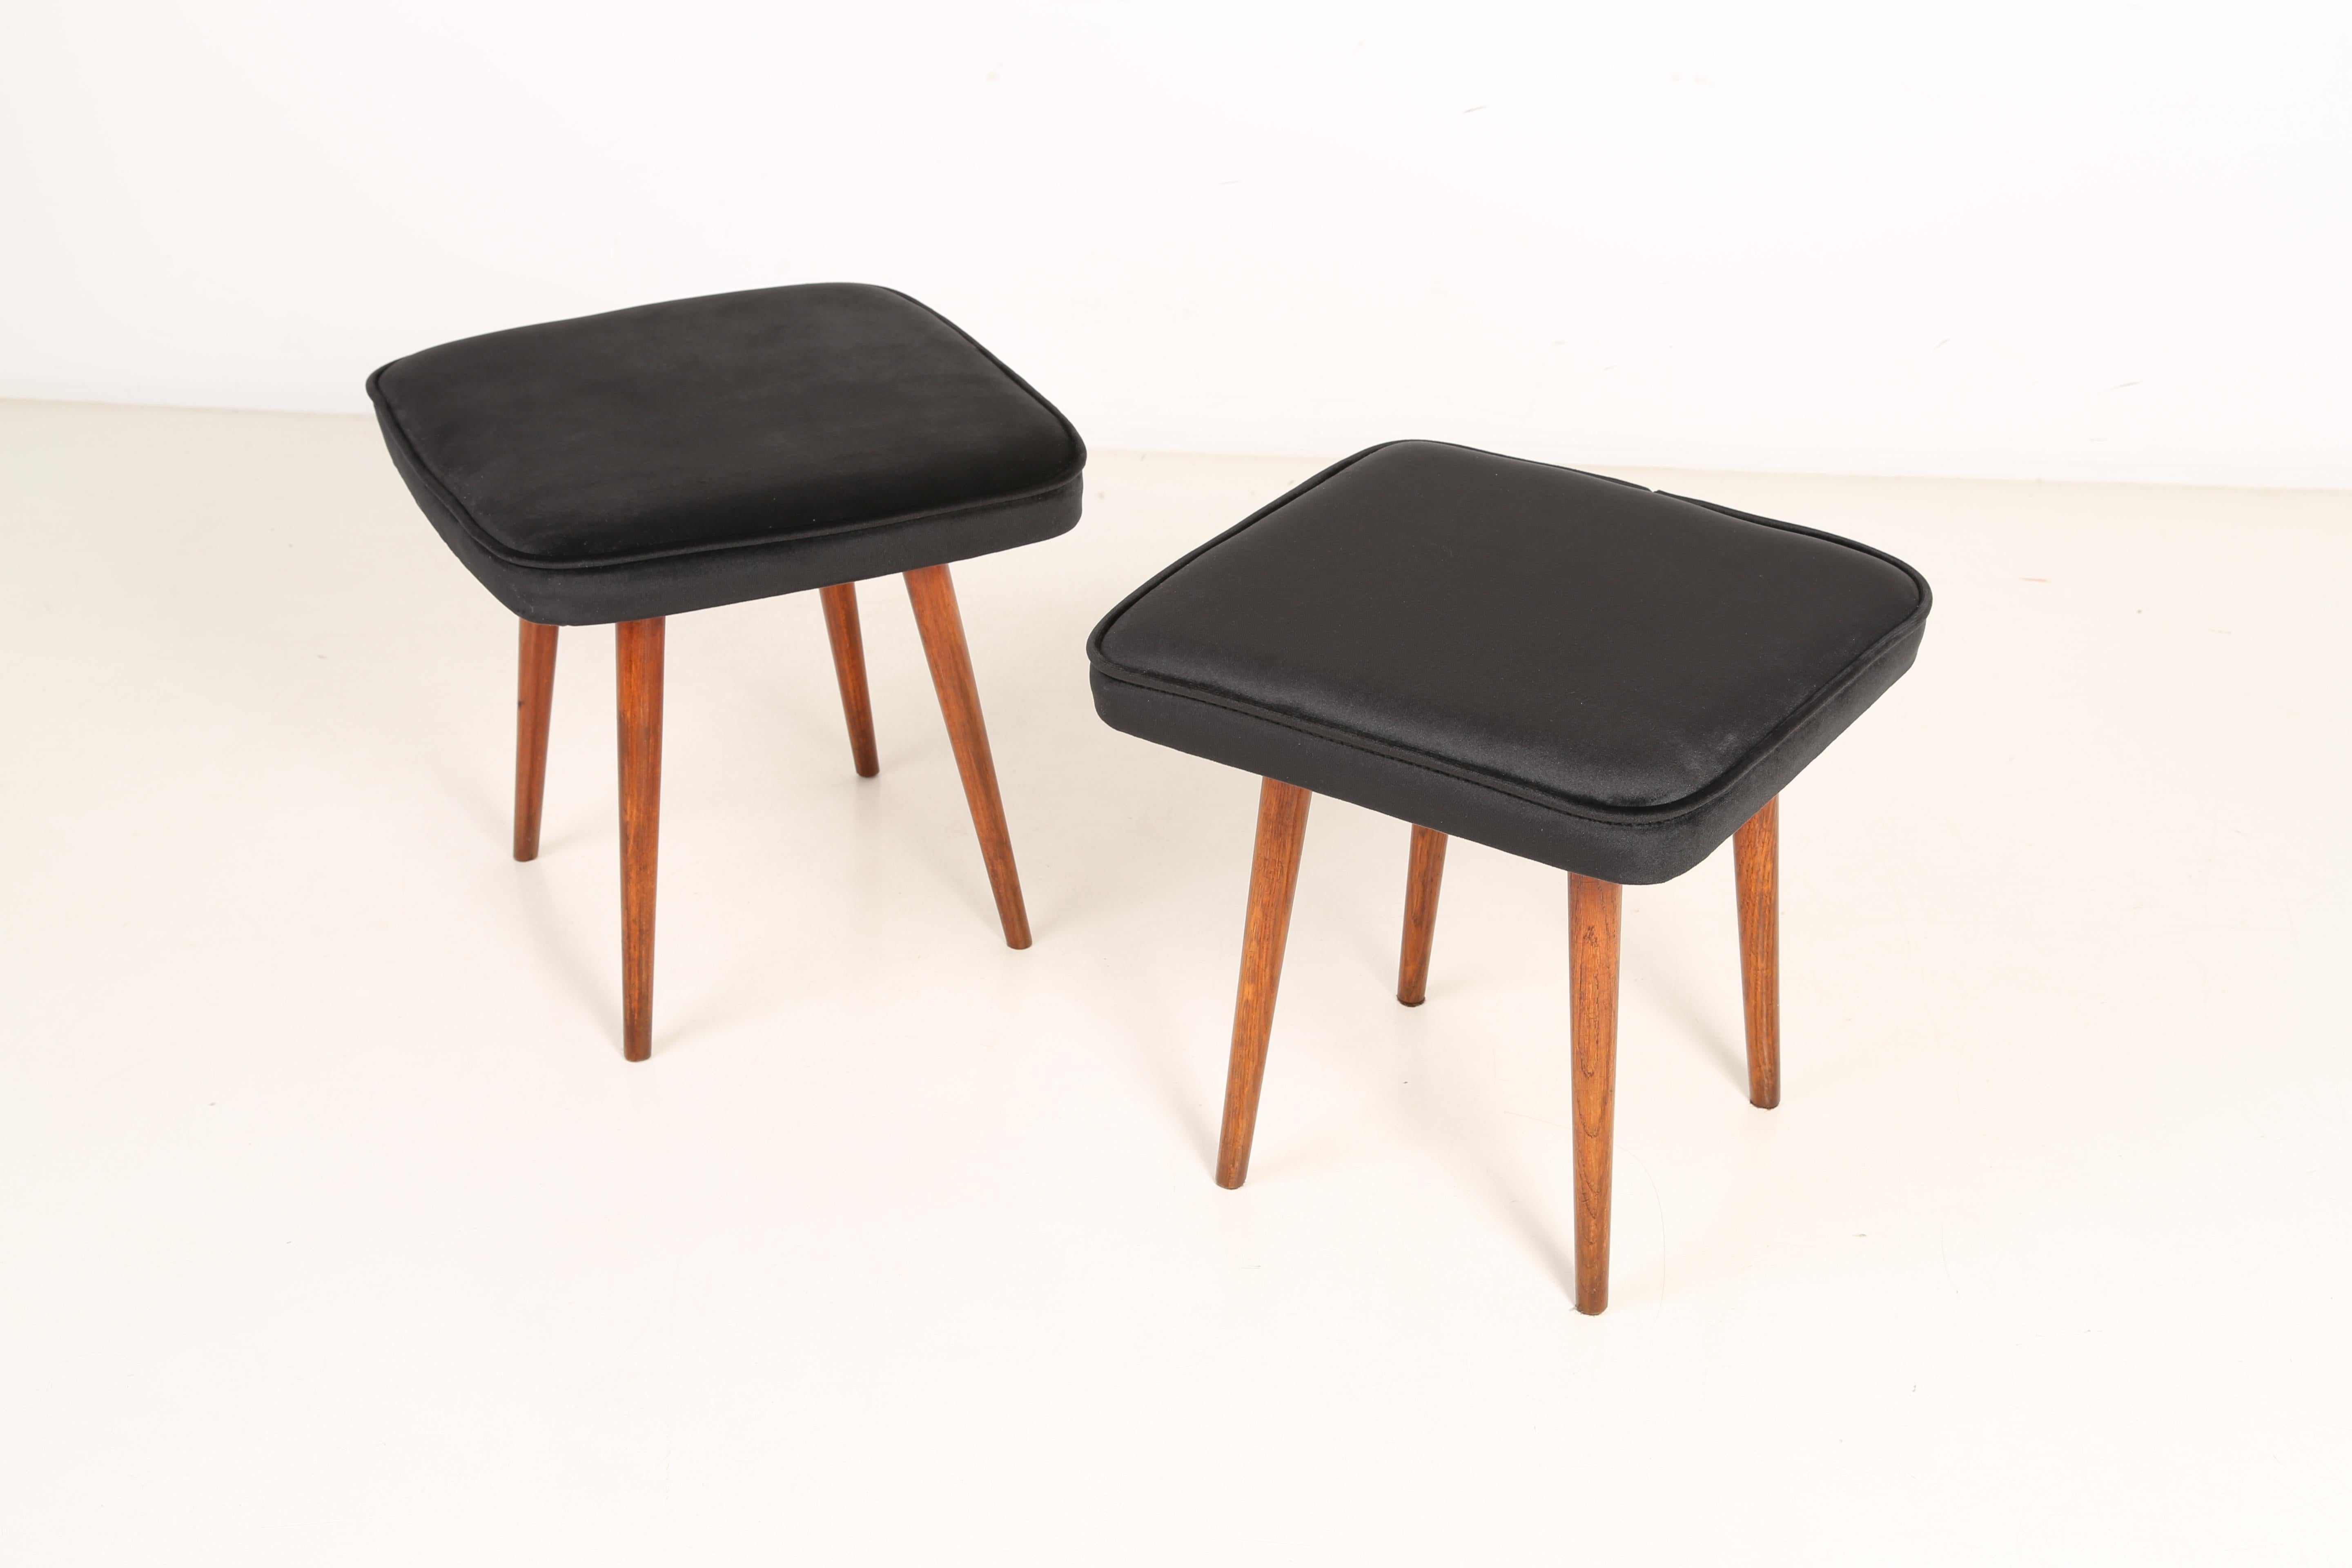 Stool from the turn of the 1960s and 1970s. Beautiful black velvet upholstery. The stool consists of an upholstered part, a seat and wooden legs narrowing downwards, characteristic of the 1960s style. We can prepare this pair also in another color